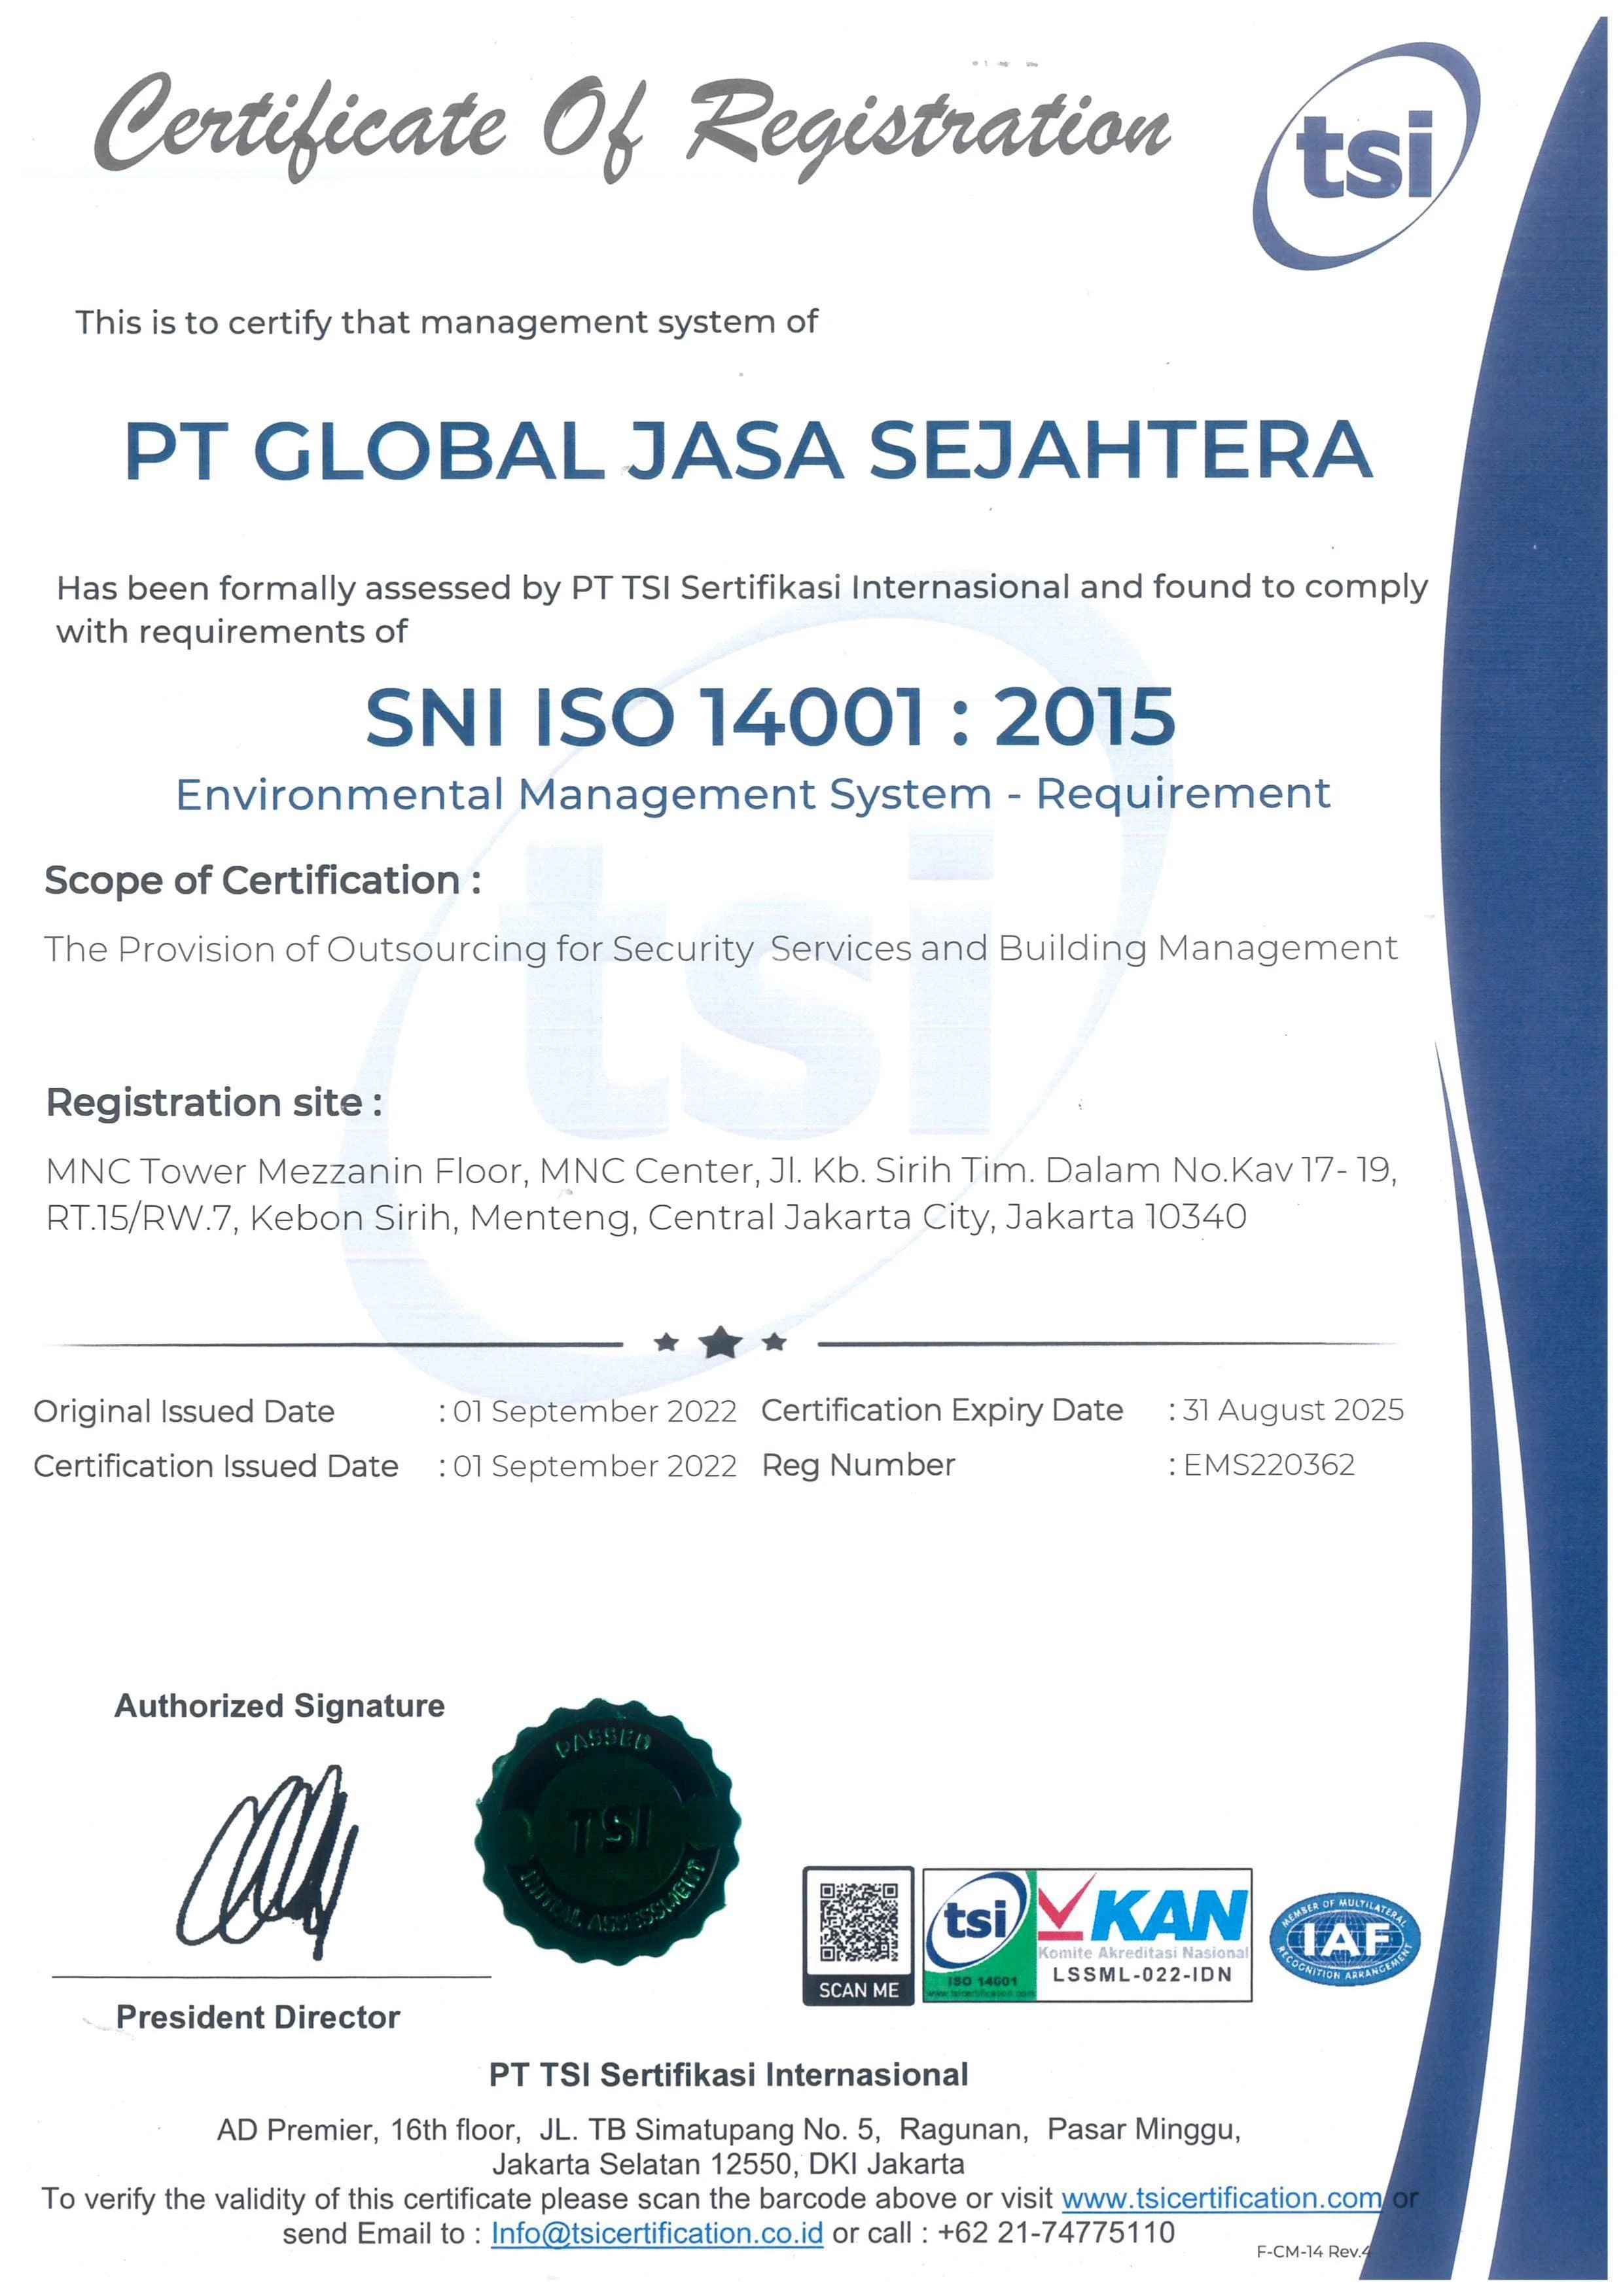 The Provision of Outsourcing for Security Service and Building Management (SNI ISO 14001:2015)